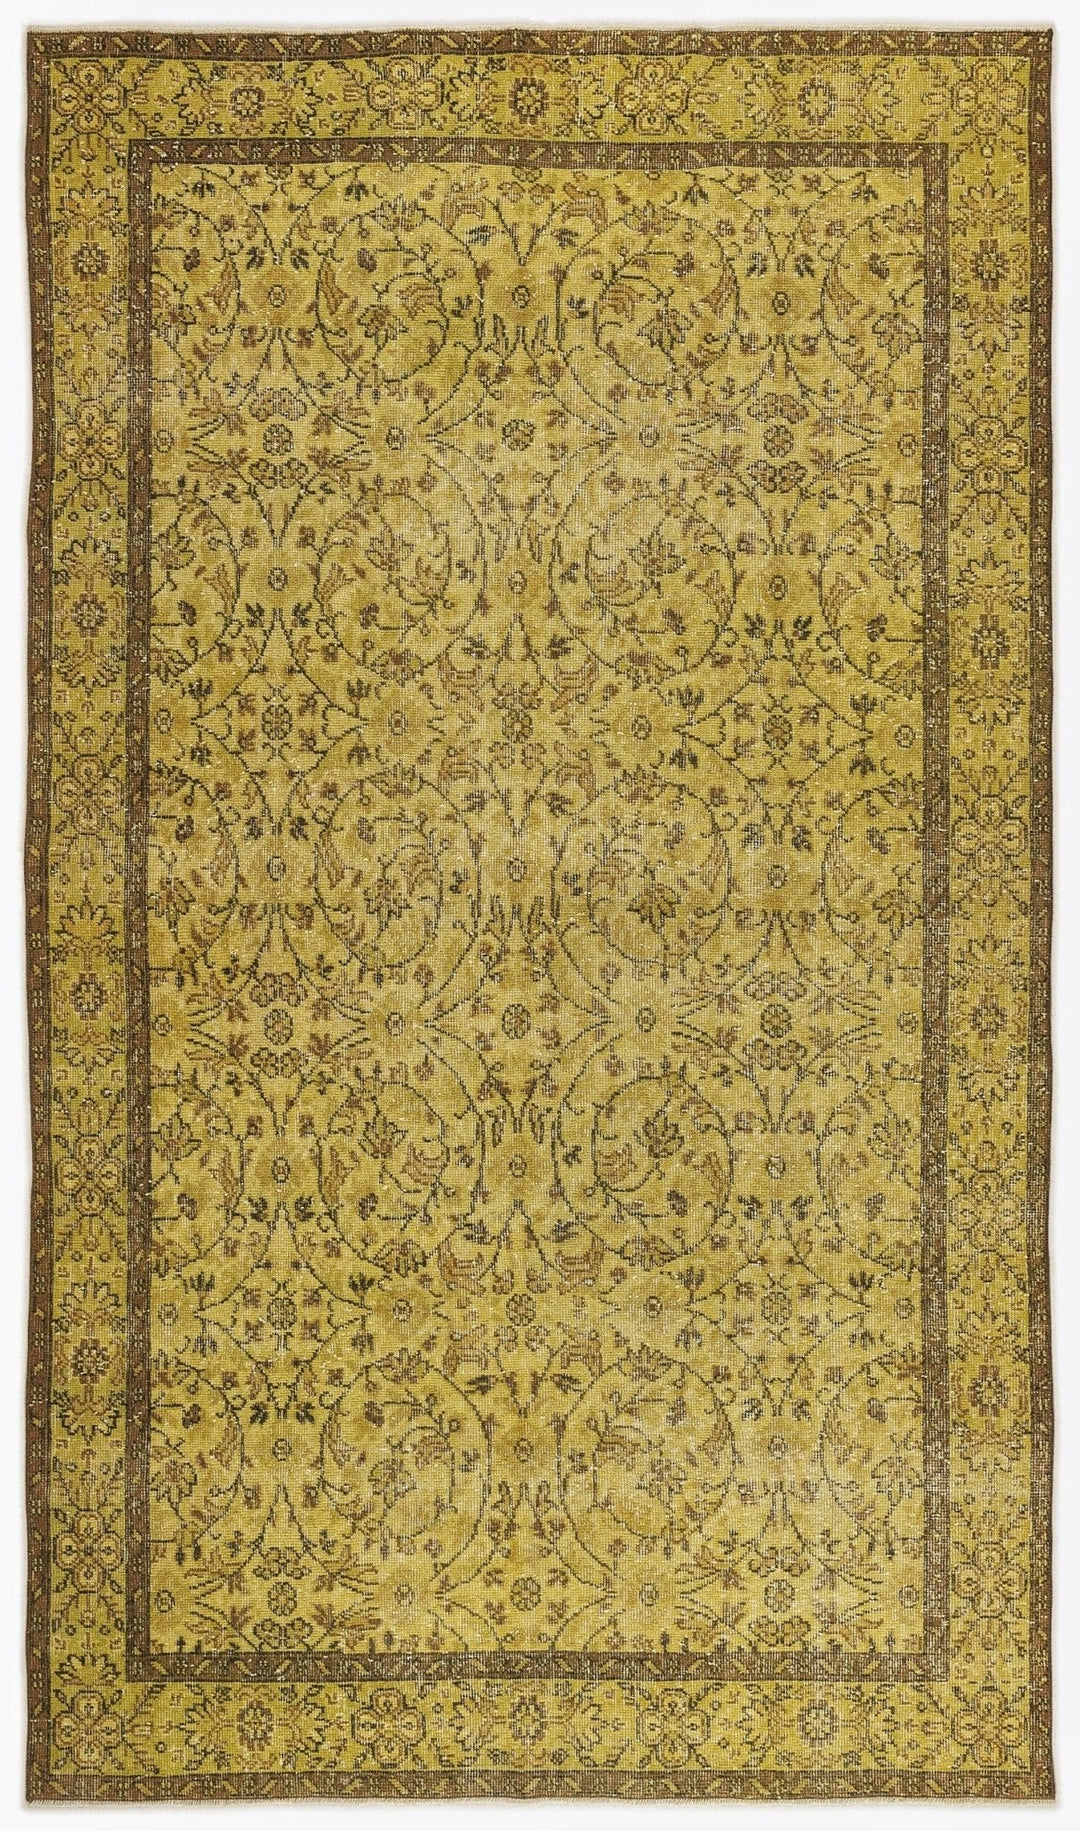 Athens 6948 Yellow Tumbled Wool Hand Woven Carpet 167 x 290